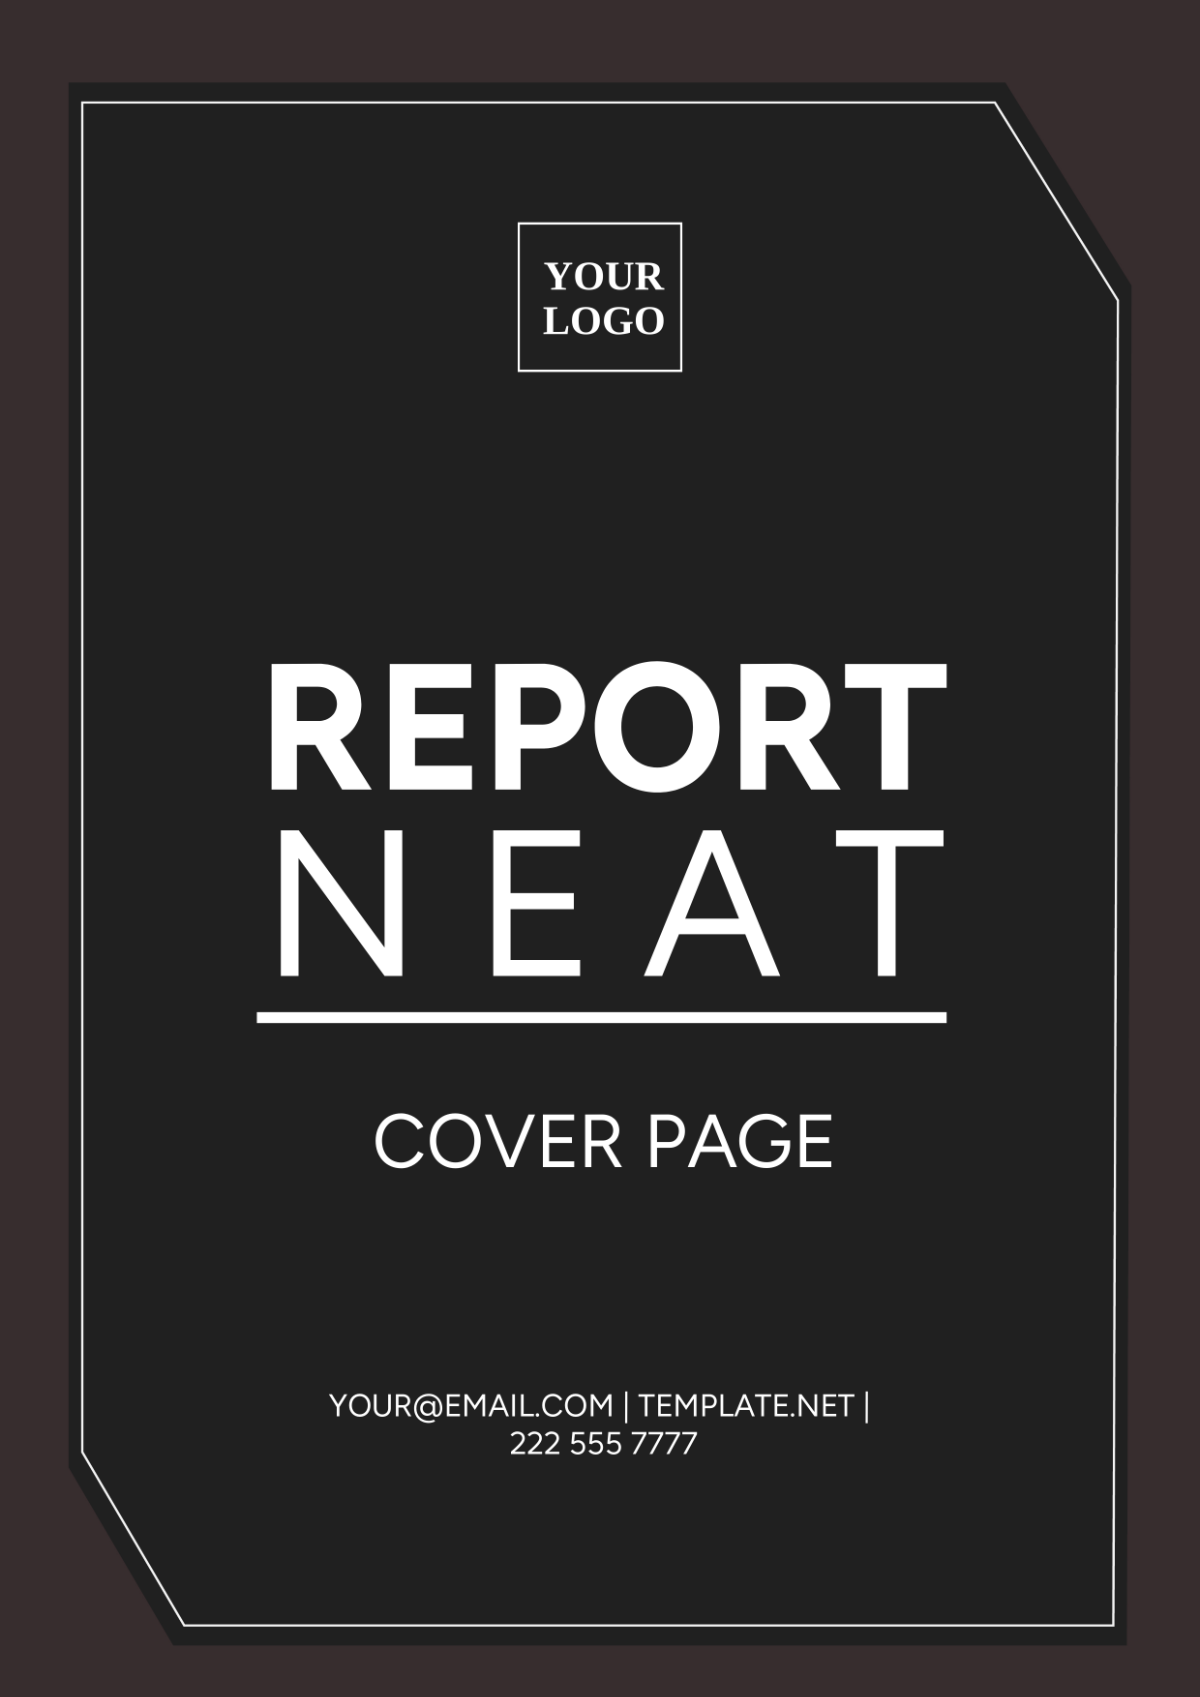 Report Neat Cover Page Template